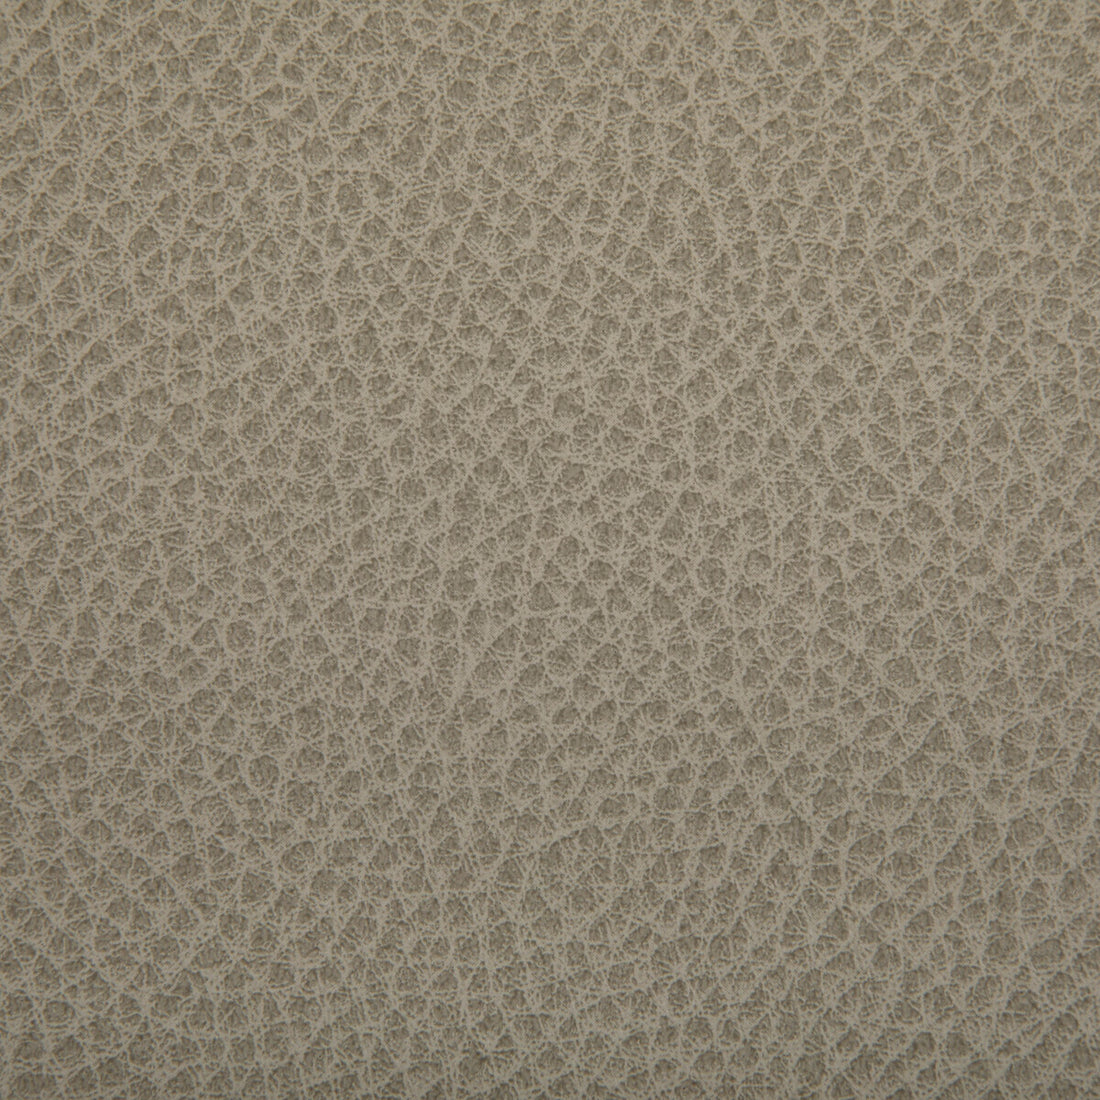 Woolf fabric in sandbar color - pattern WOOLF.121.0 - by Kravet Contract